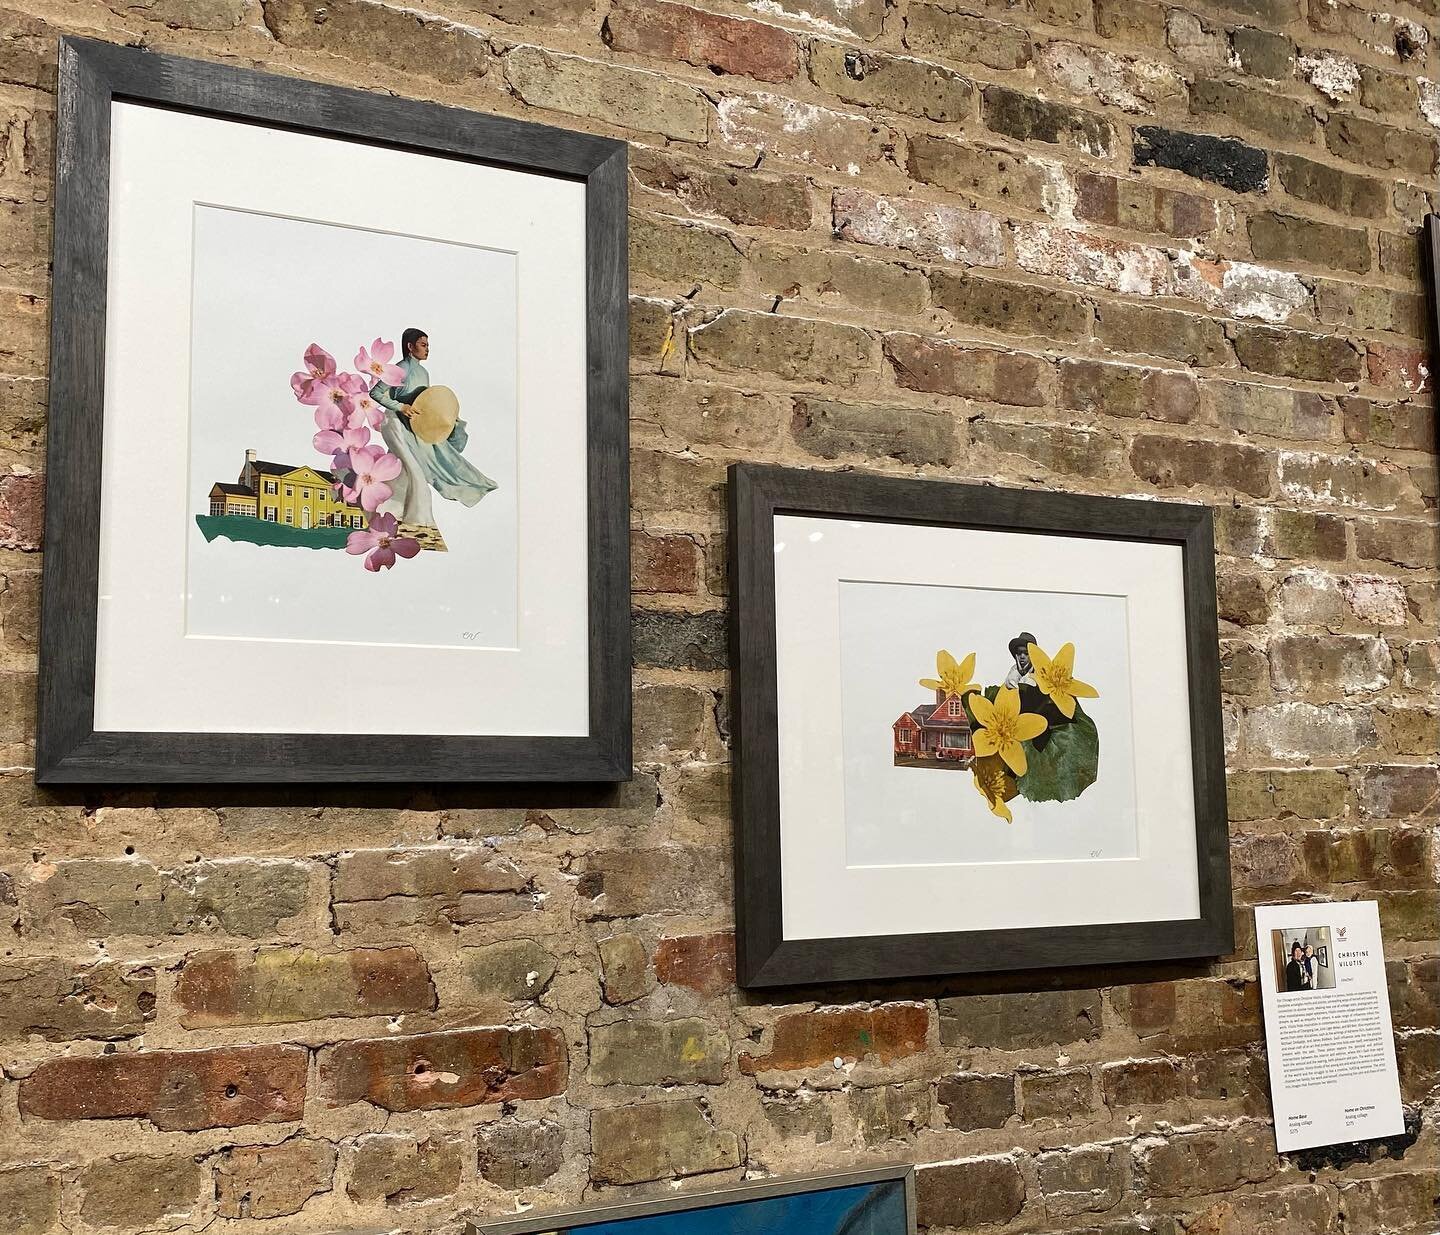 My two works, &ldquo;Home Base&rdquo; and &ldquo;Home for Christmas,&rdquo; up at the Fulton Street Collective for the ongoing group show &ldquo;Faces of Fulton.&rdquo; So grateful for the opportunity to show my art and be included among such talente